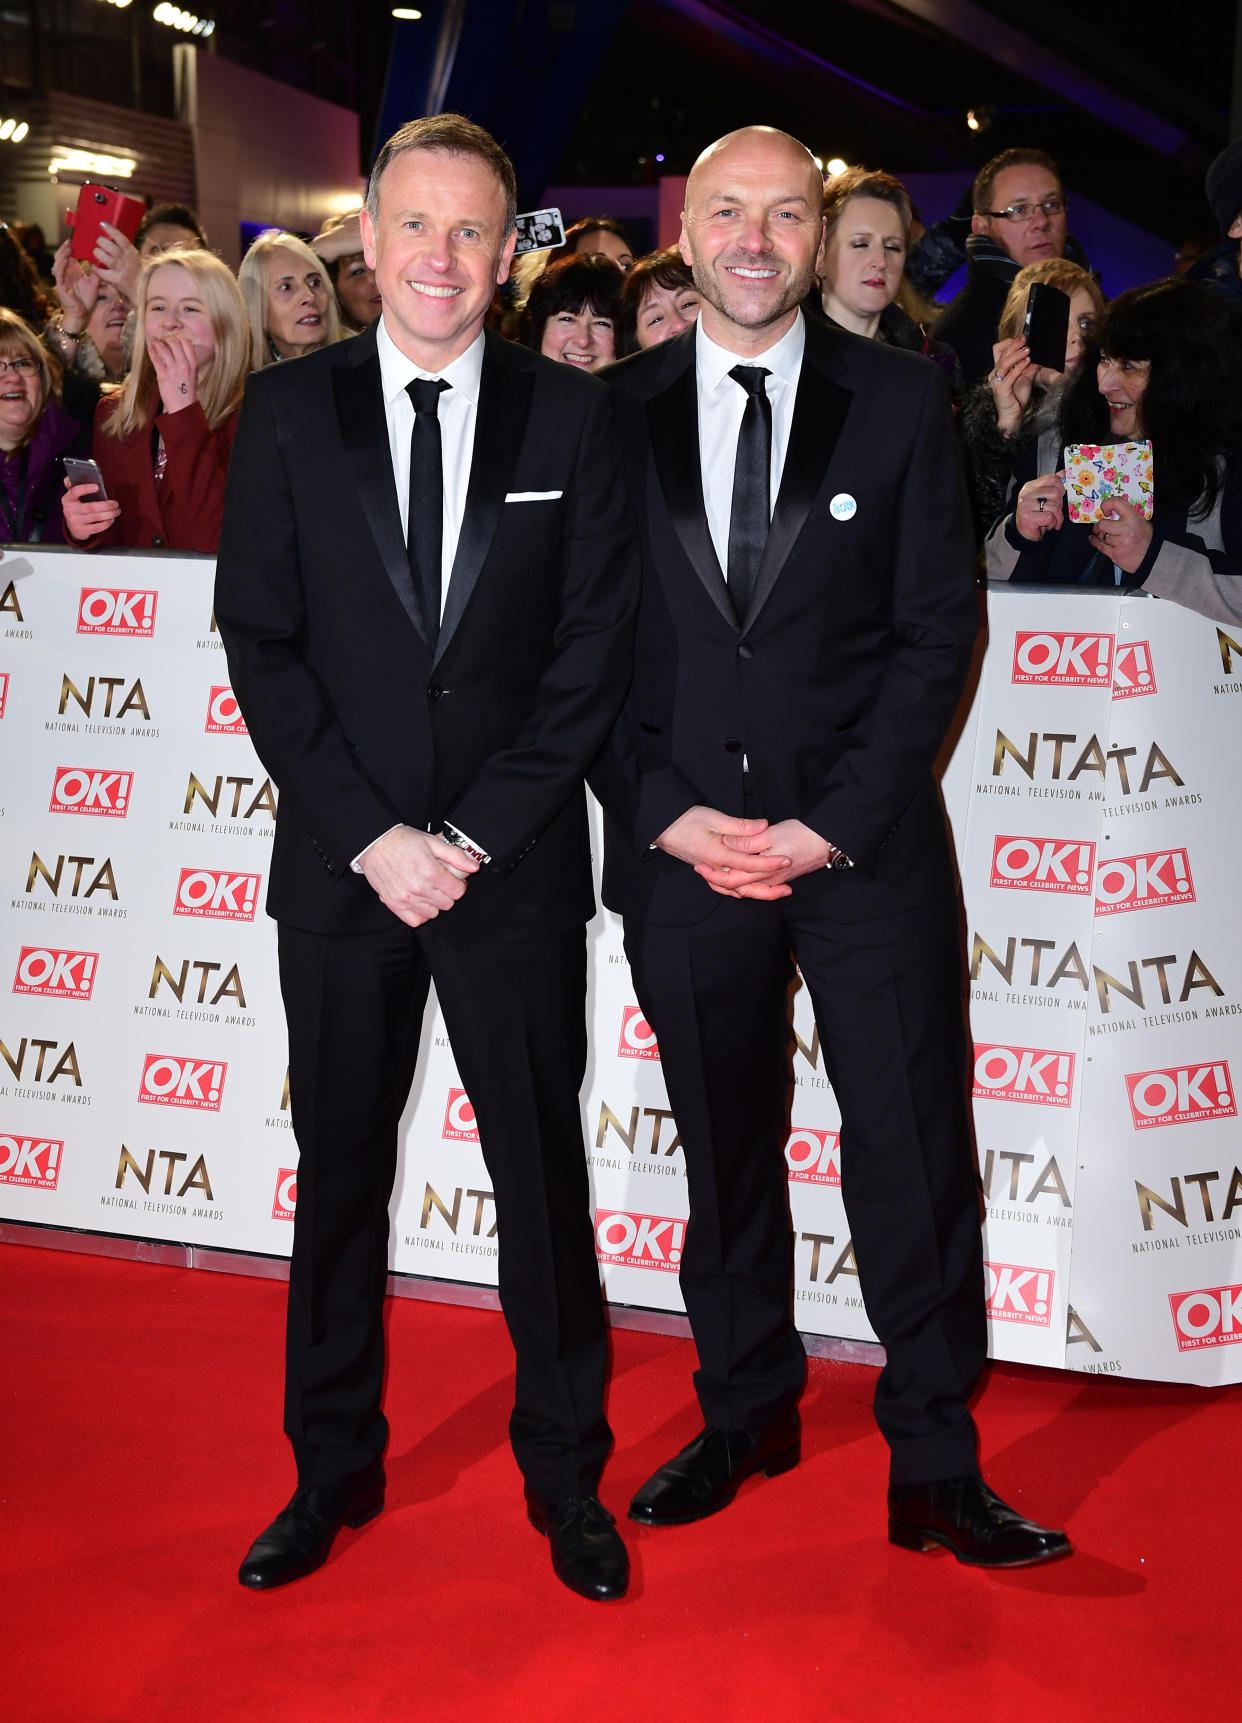 Tim Lovejoy and Simon Rimmer arriving at the National Television Awards 2017, held at The O2 Arena, London. PRESS ASSOCIATION Photo. Picture date: 25th January, 2017. See PA Story SHOWBIZ NTAs. Photo credit should read: Ian West/PA Wire